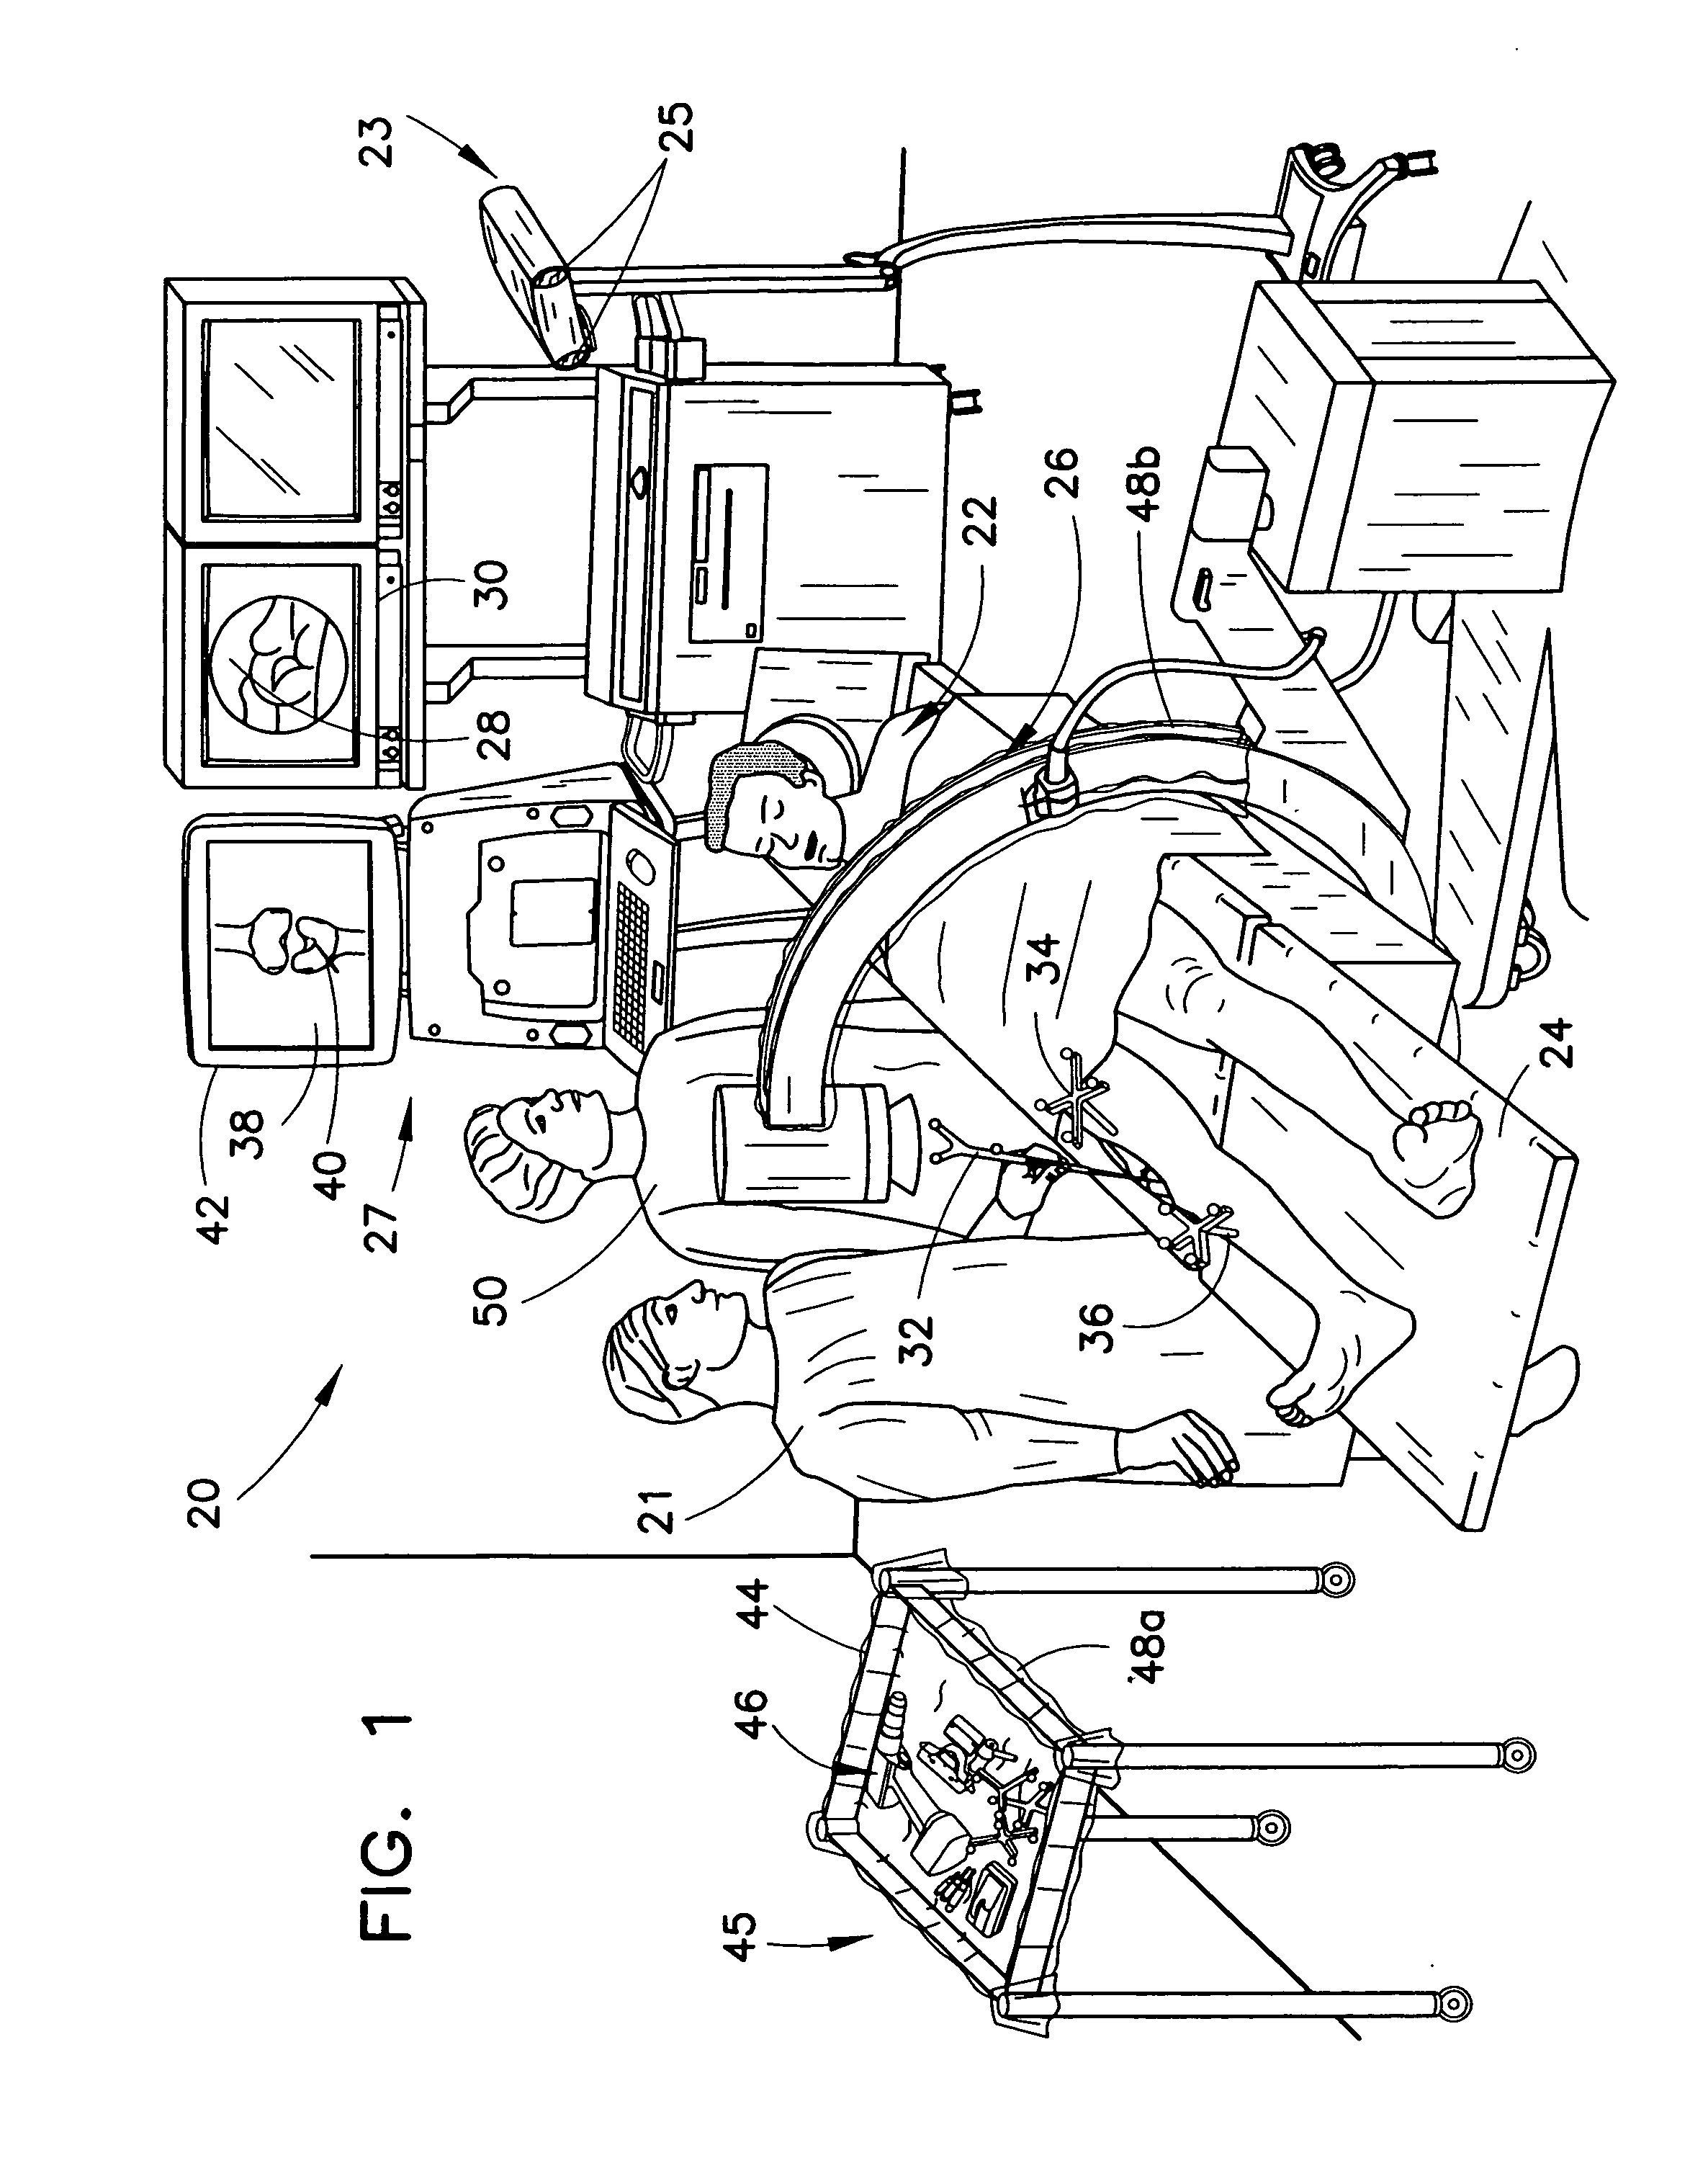 Image guided tracking array and method